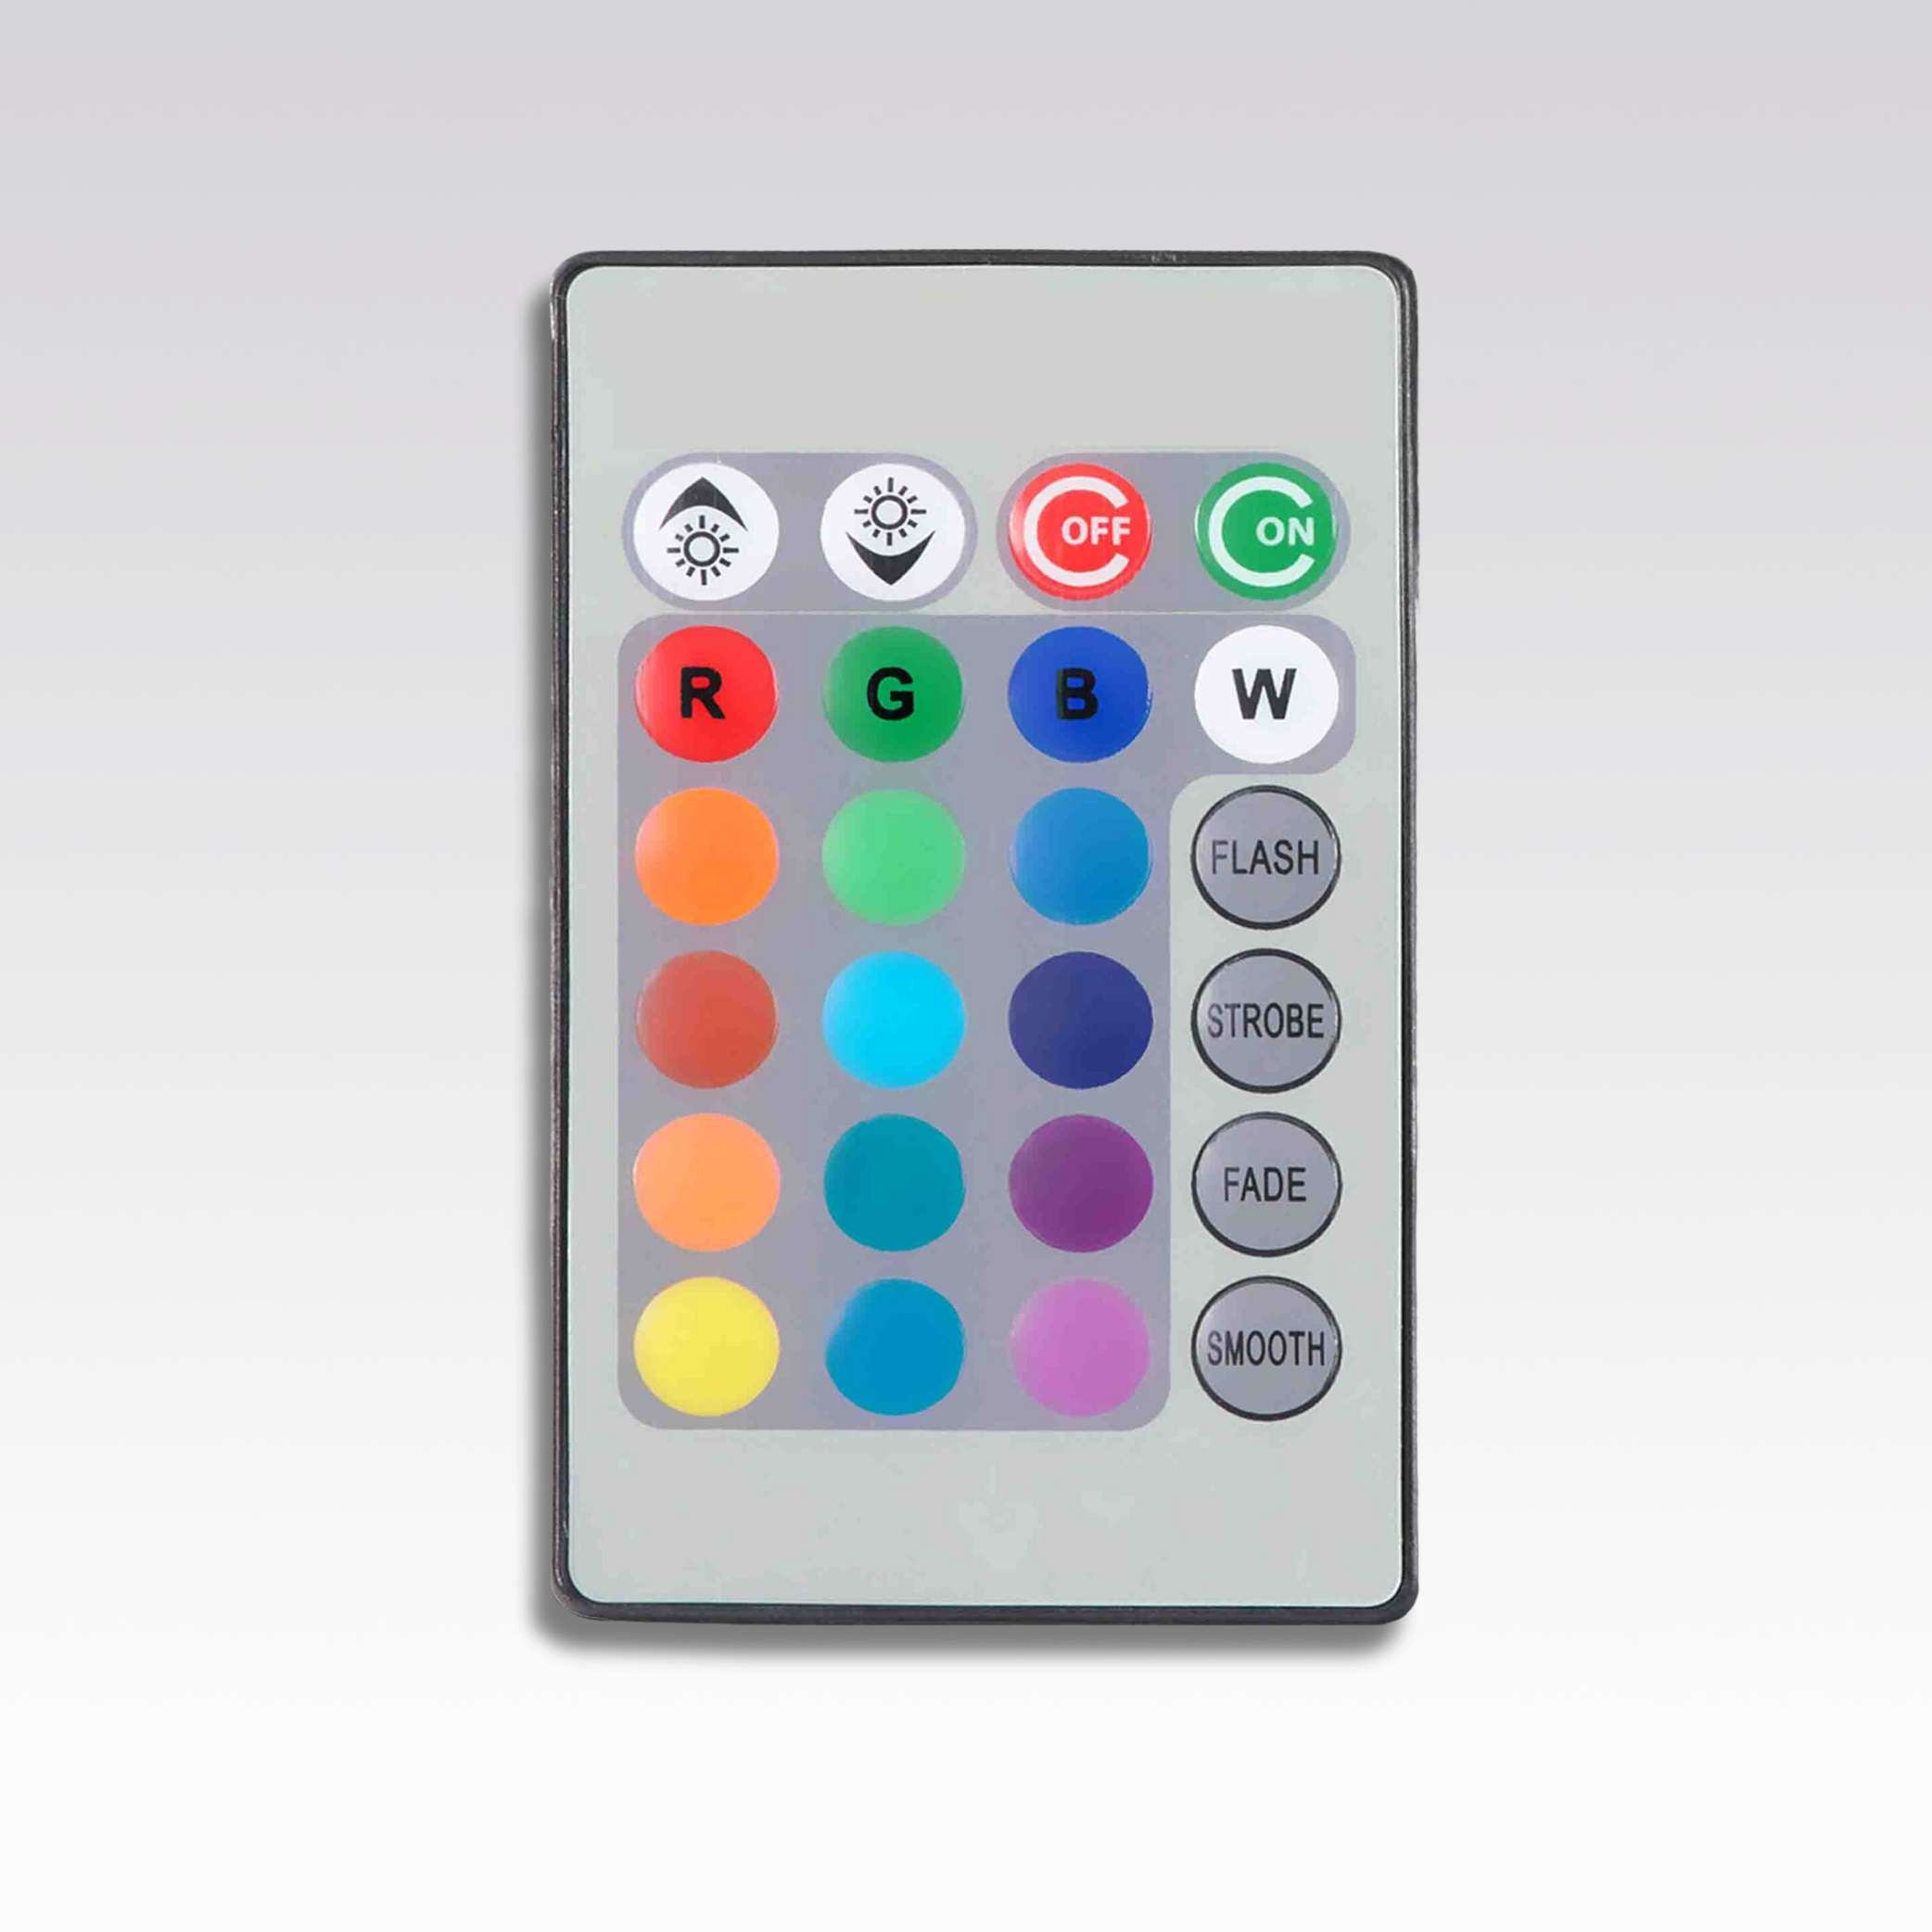 New Chromotherapy Remote V2 : Category - Accessory, Diagram - n/a